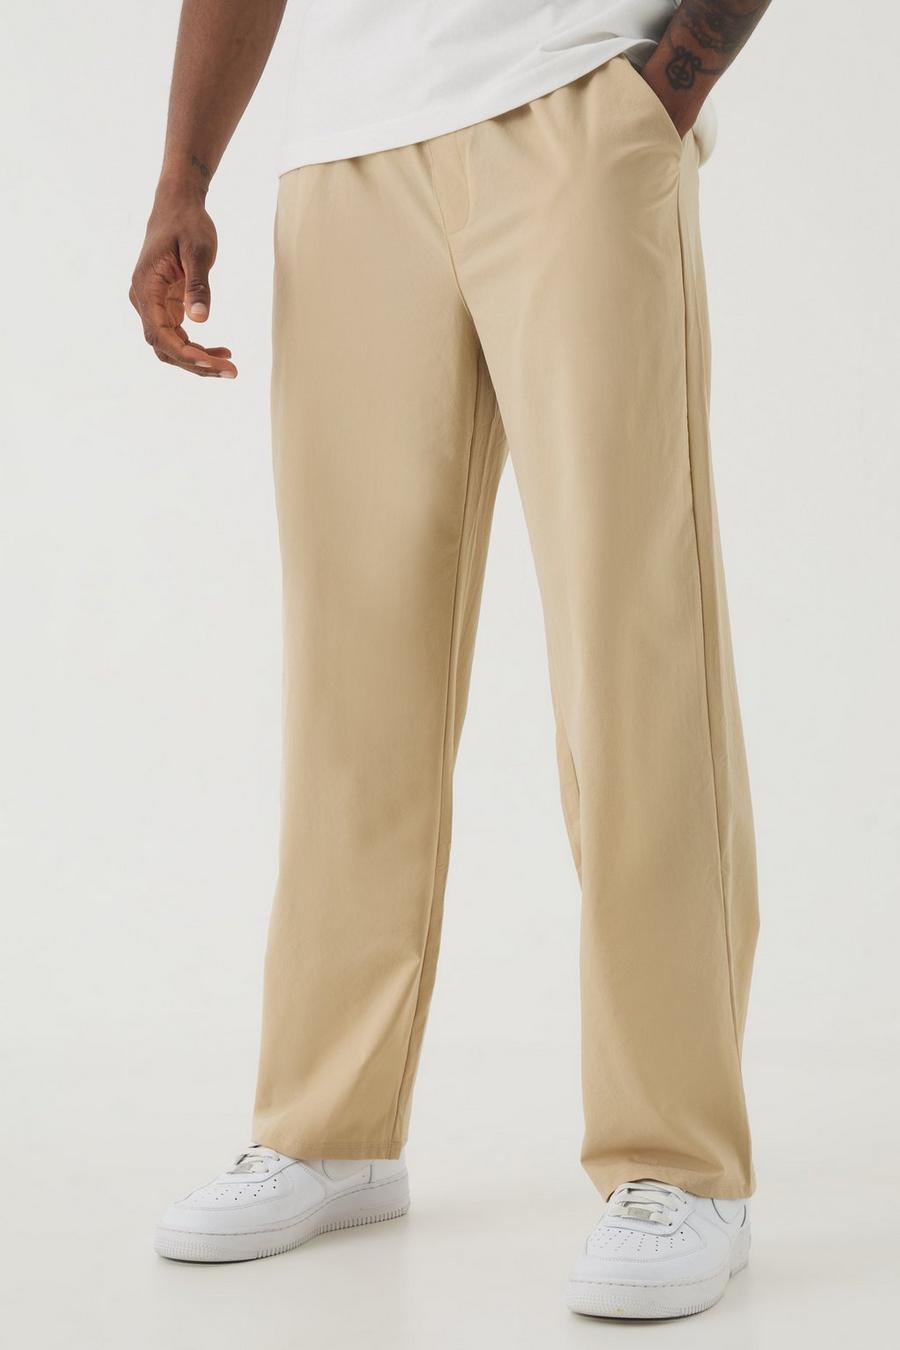 Stone Tall Elasticated Waist Lightweight Technical Stretch Relaxed Cropped Trouser